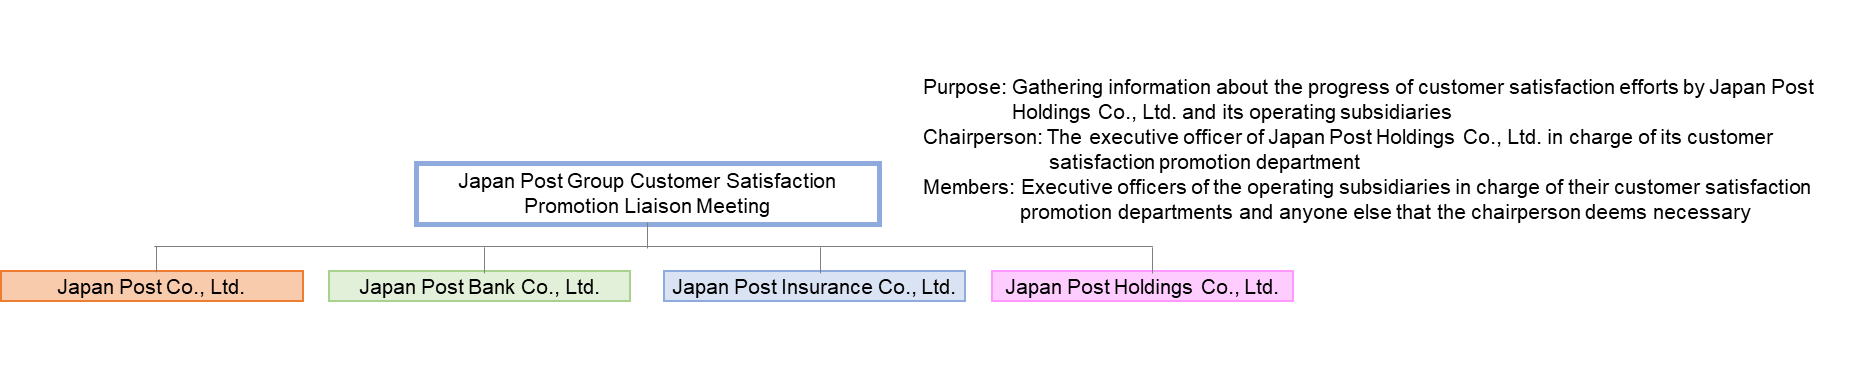 Japan Post Group Customer Satisfaction Promotion Liaison Meeting/Purpose: Gathering information about the progress of customer satisfaction efforts by Japan Post Holdings Co., Ltd. and its operating subsidiaries/Chairperson: The executive officer of Japan Post Holdings Co., Ltd. in charge of its customer satisfaction promotion department/Members: Executive officers of the operating subsidiaries in charge of their customer satisfaction promotion departments and anyone else that the chairperson deems necessary
